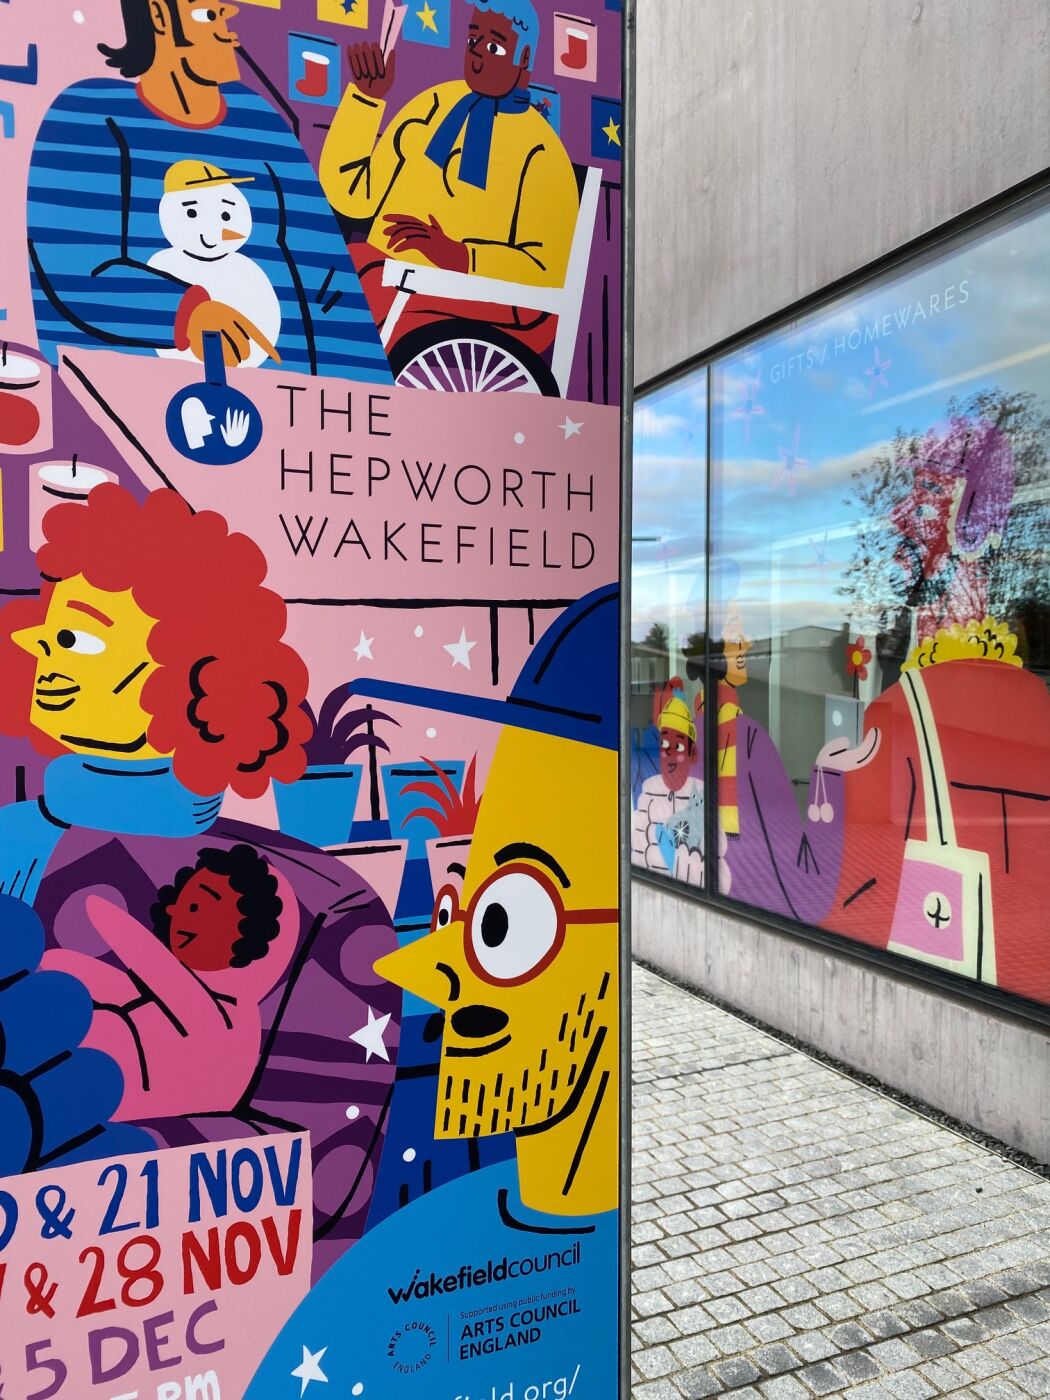 Illustrated holiday campaign for The Heppworth Wakefield art museum by Fredde Lanka